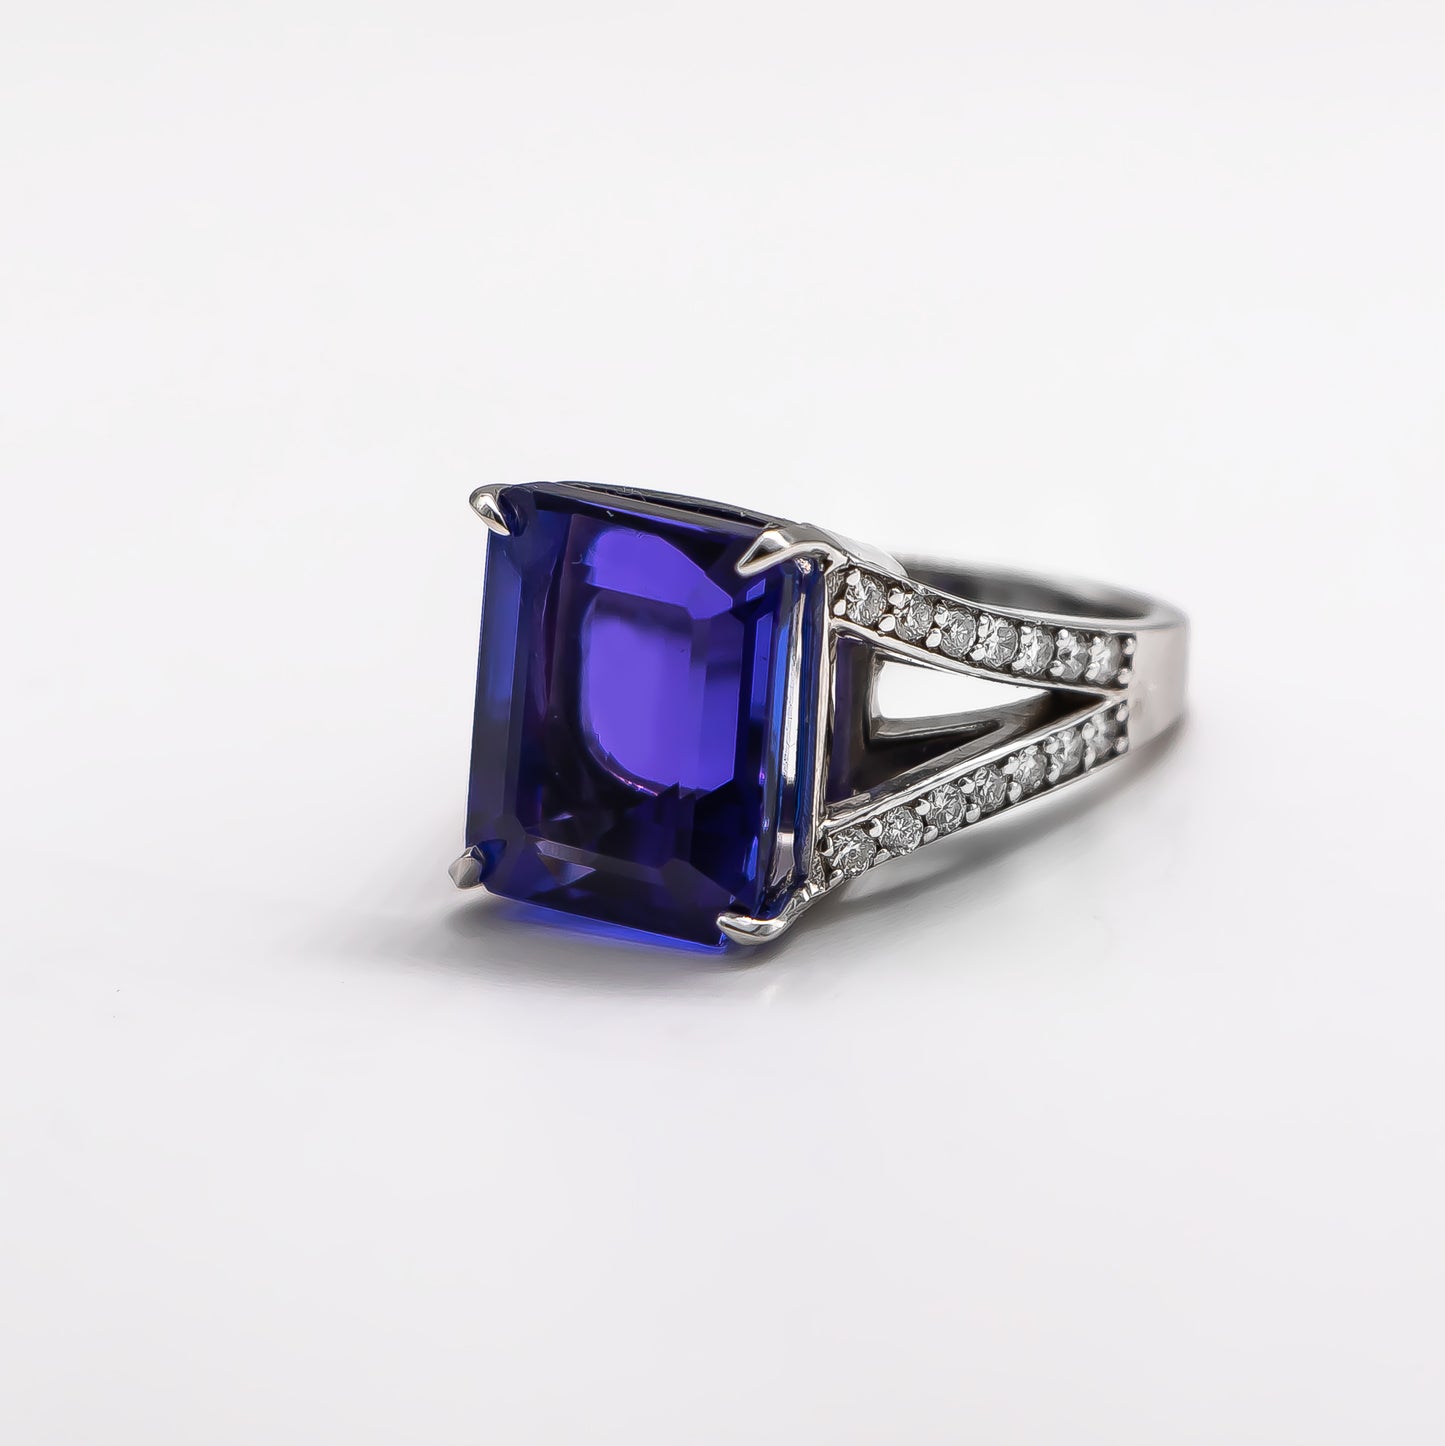 Very Fine 17.67 Carat Tanzanite Ring Encrusted With 1.46 Carats Diamonds